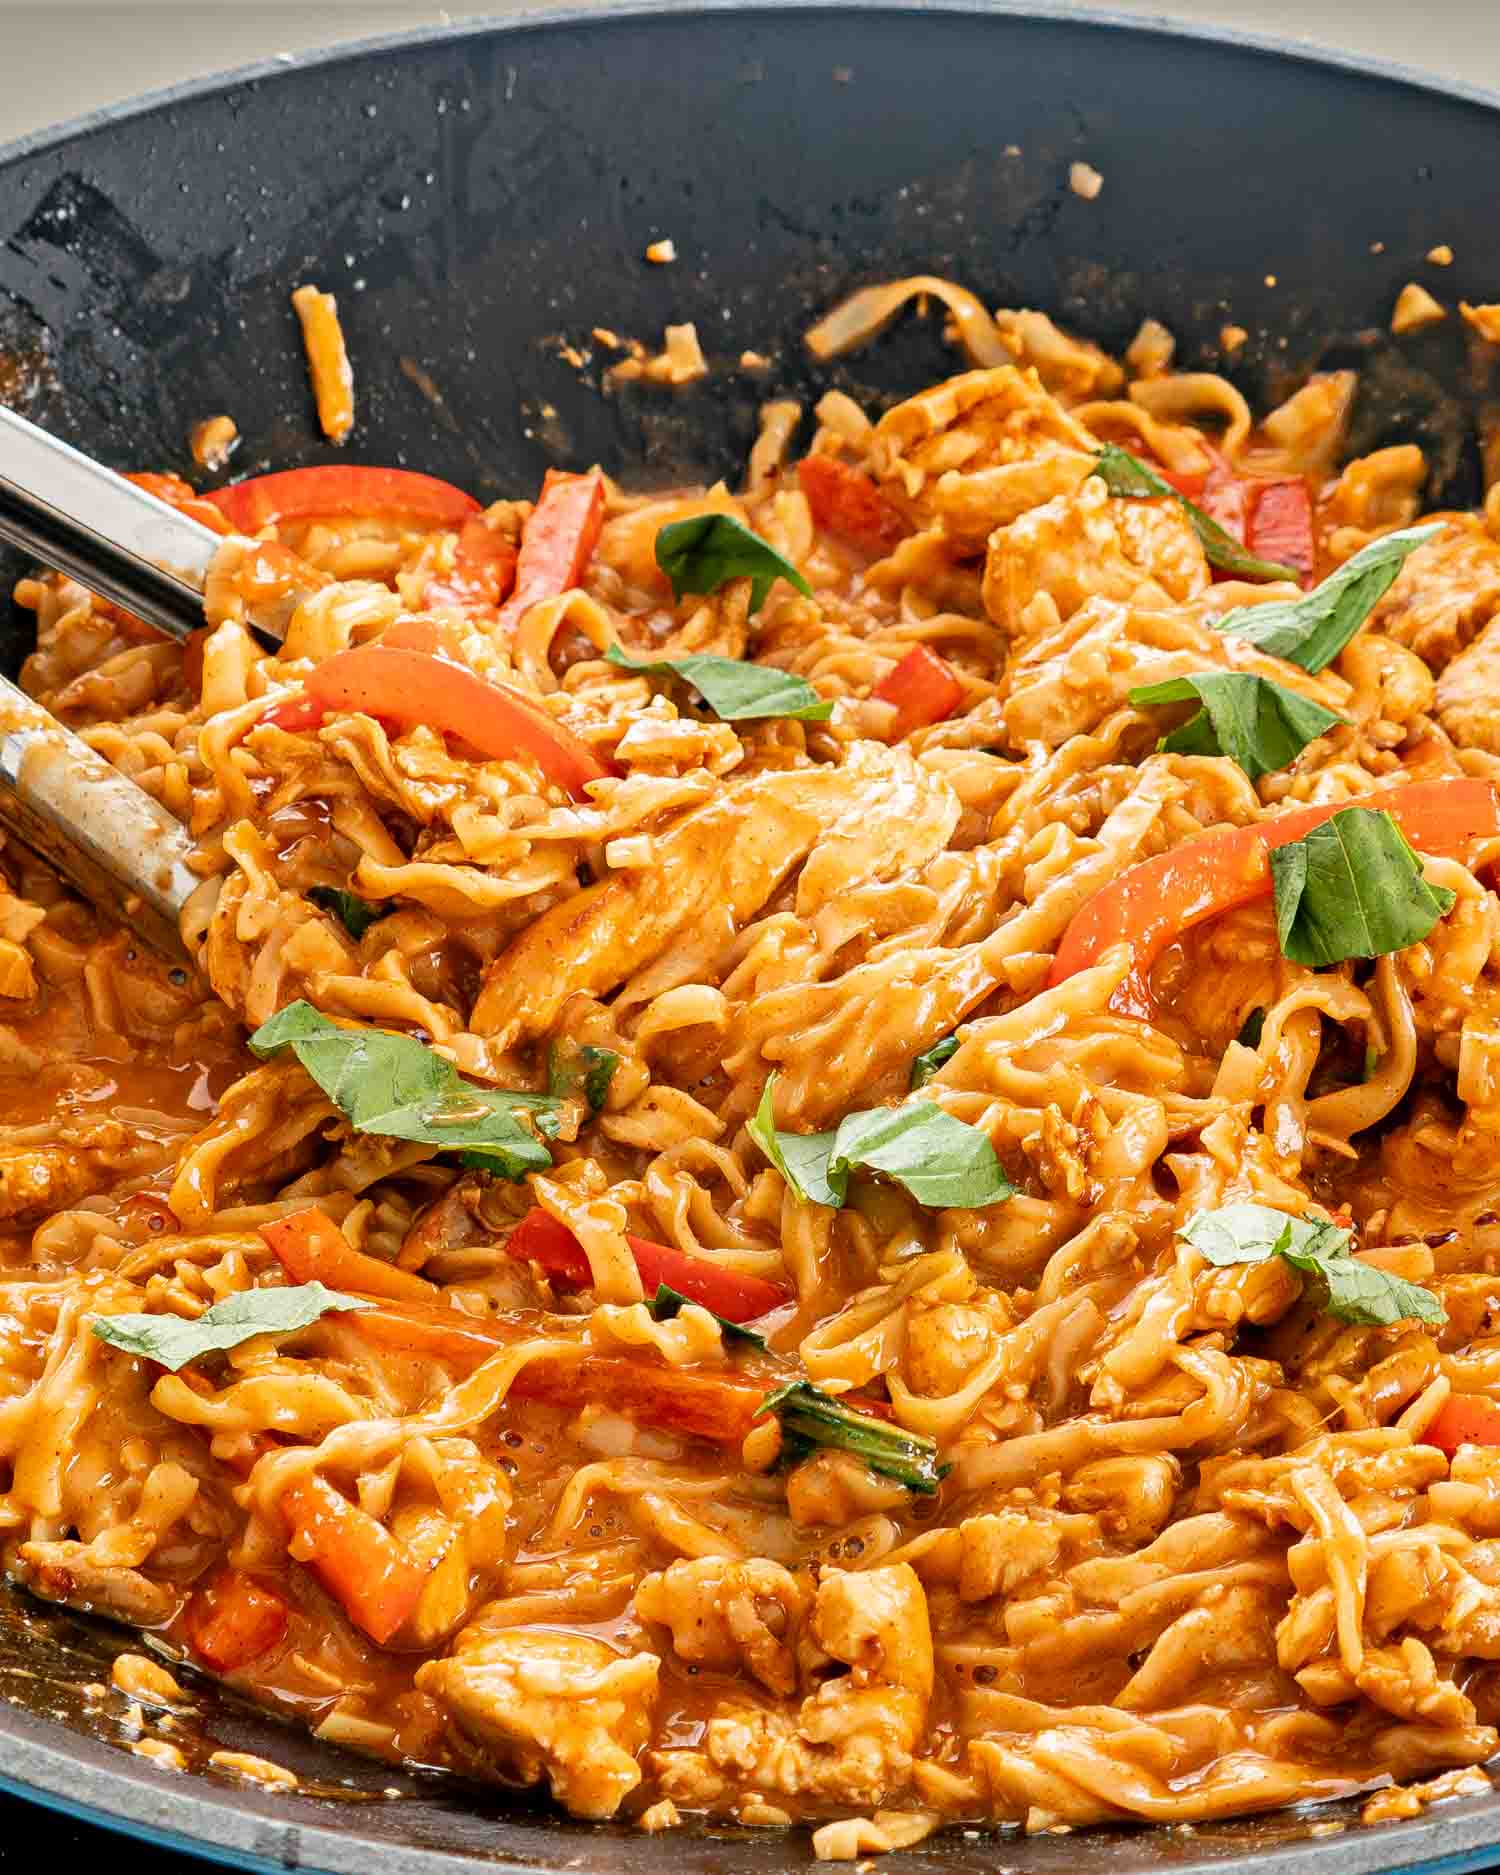 freshly made spicy peanut noodles in a wok.